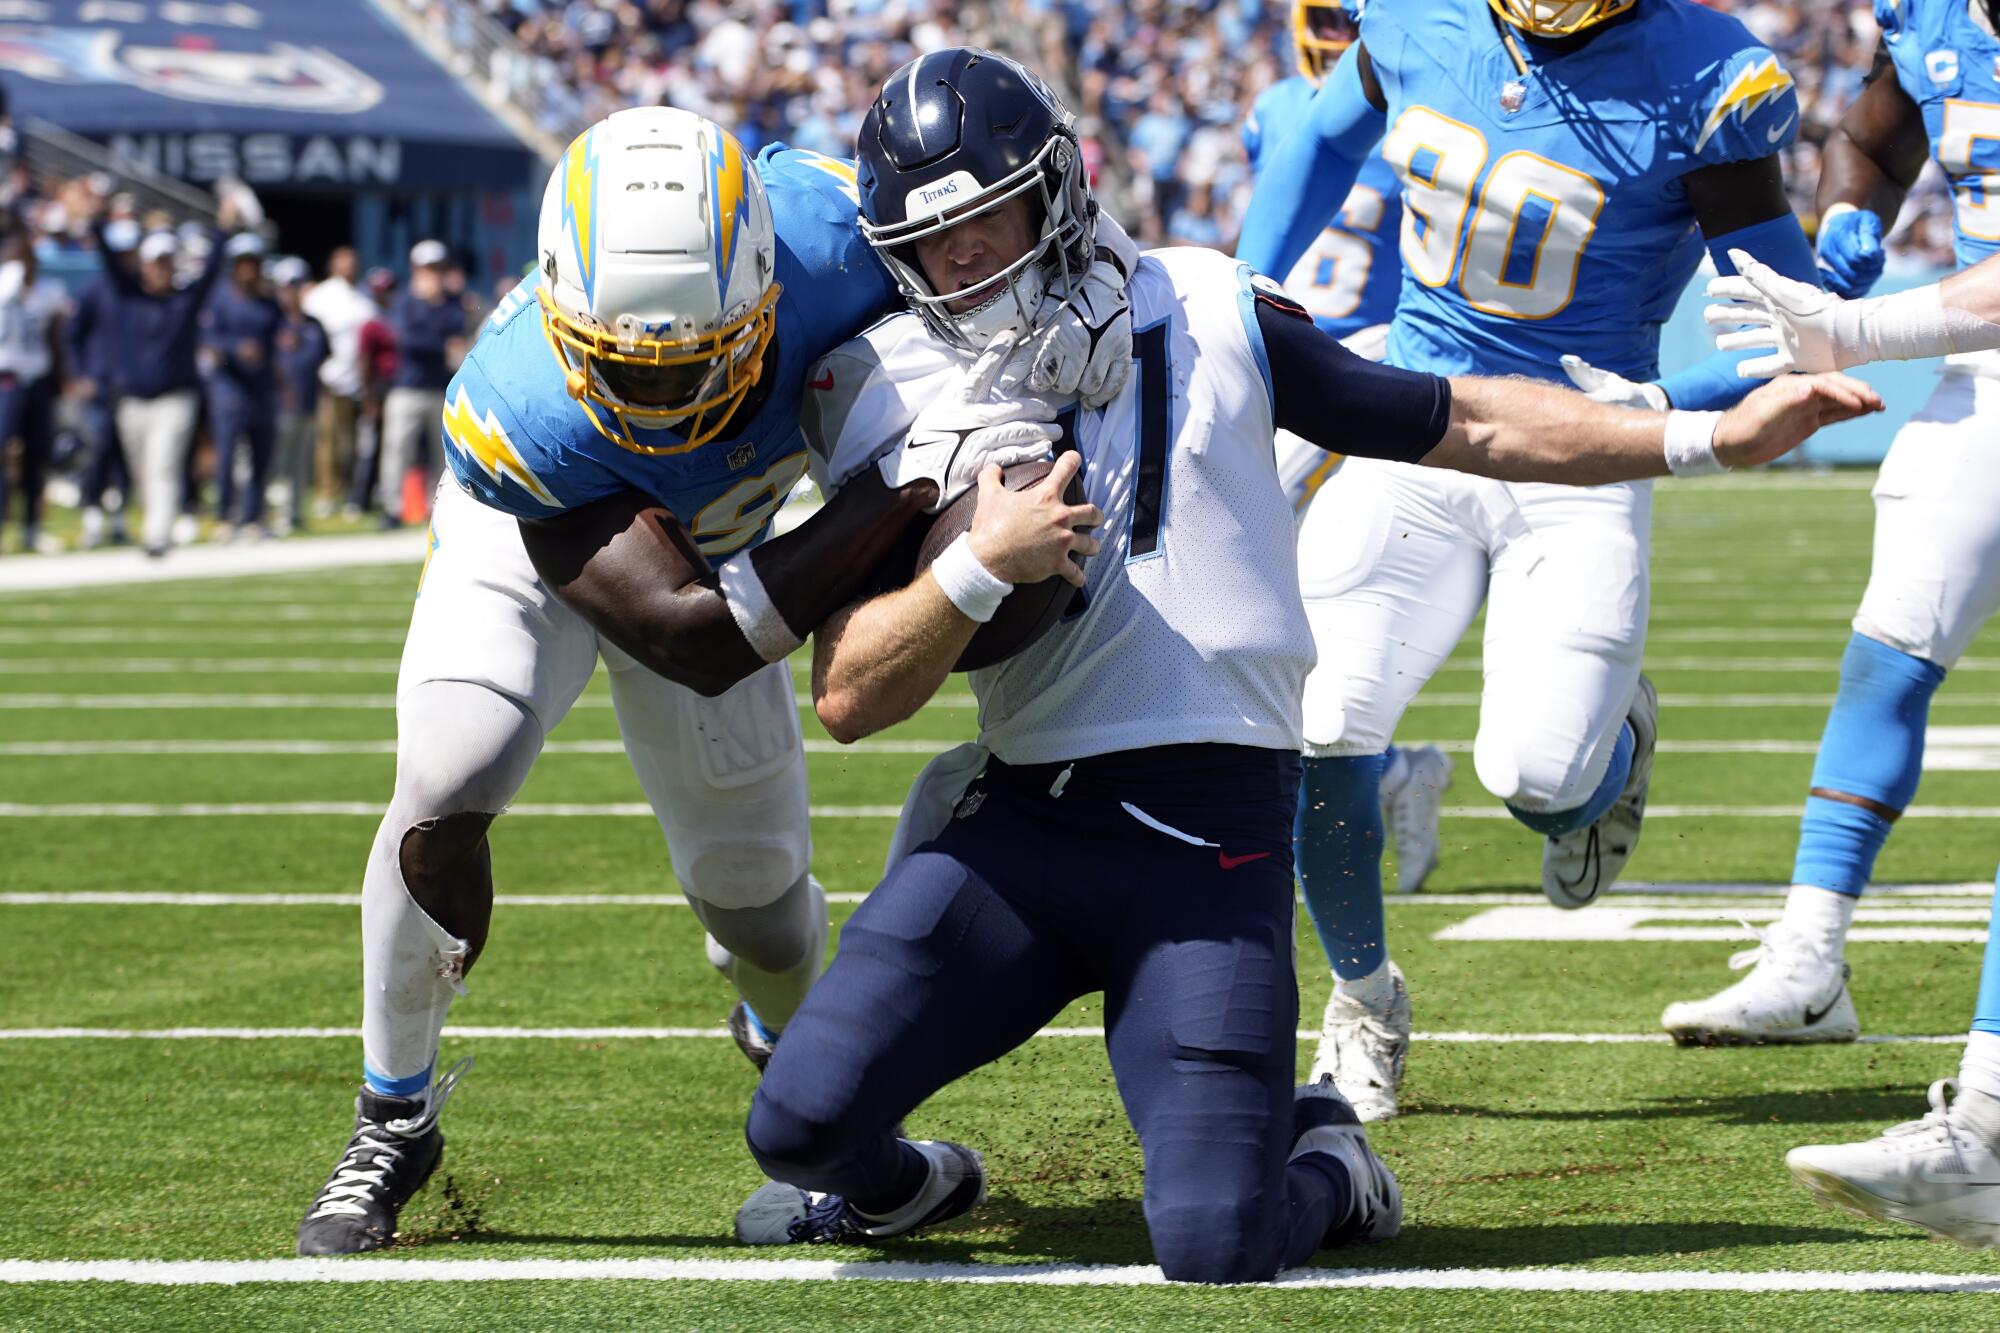 Los Angeles Chargers vs. Tennessee Titans highlights